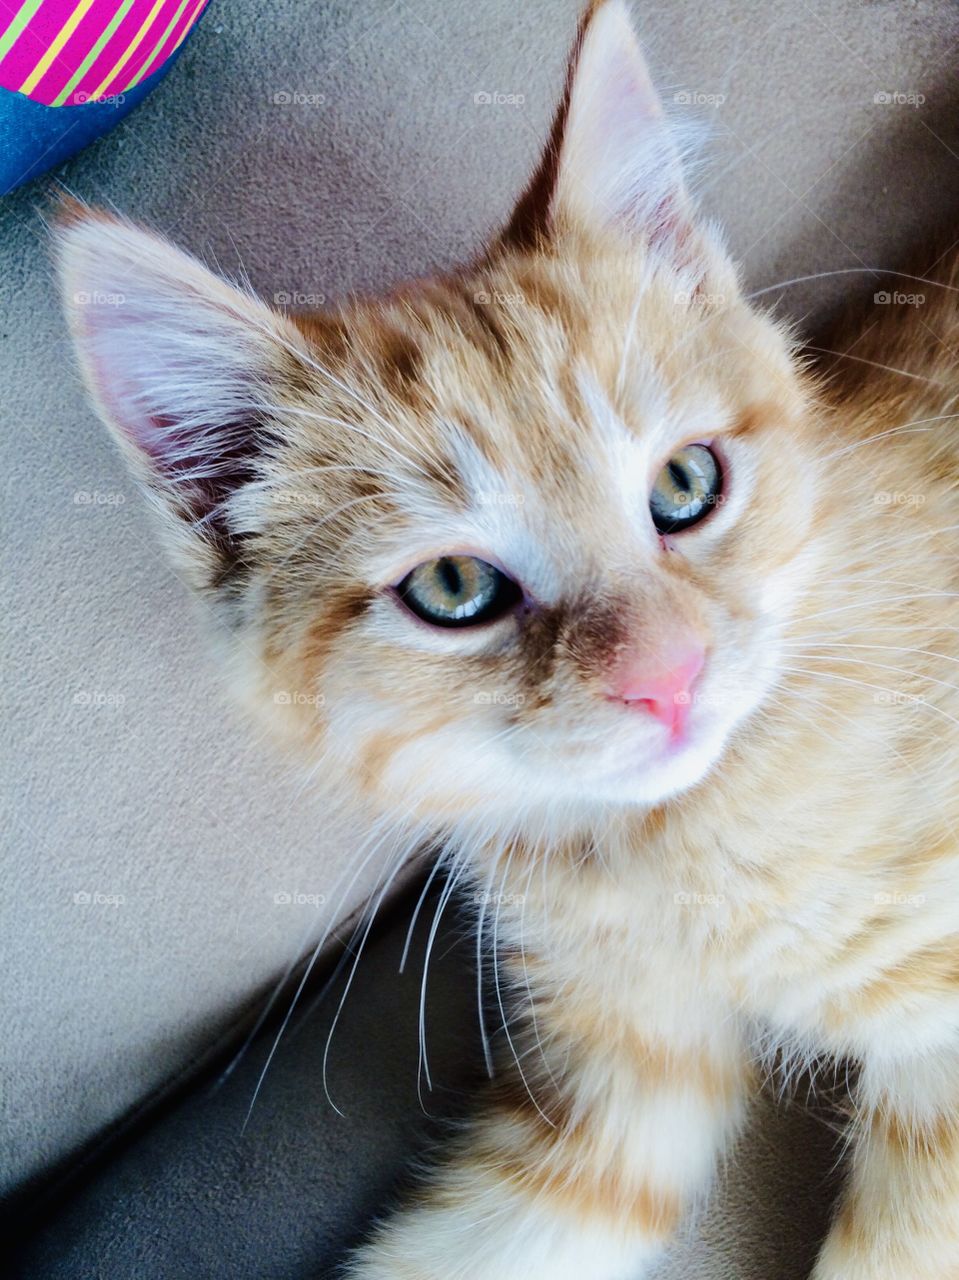 Very sweet little orange tabby kitten laying on couch looking up at camera with darling blue eyes! 